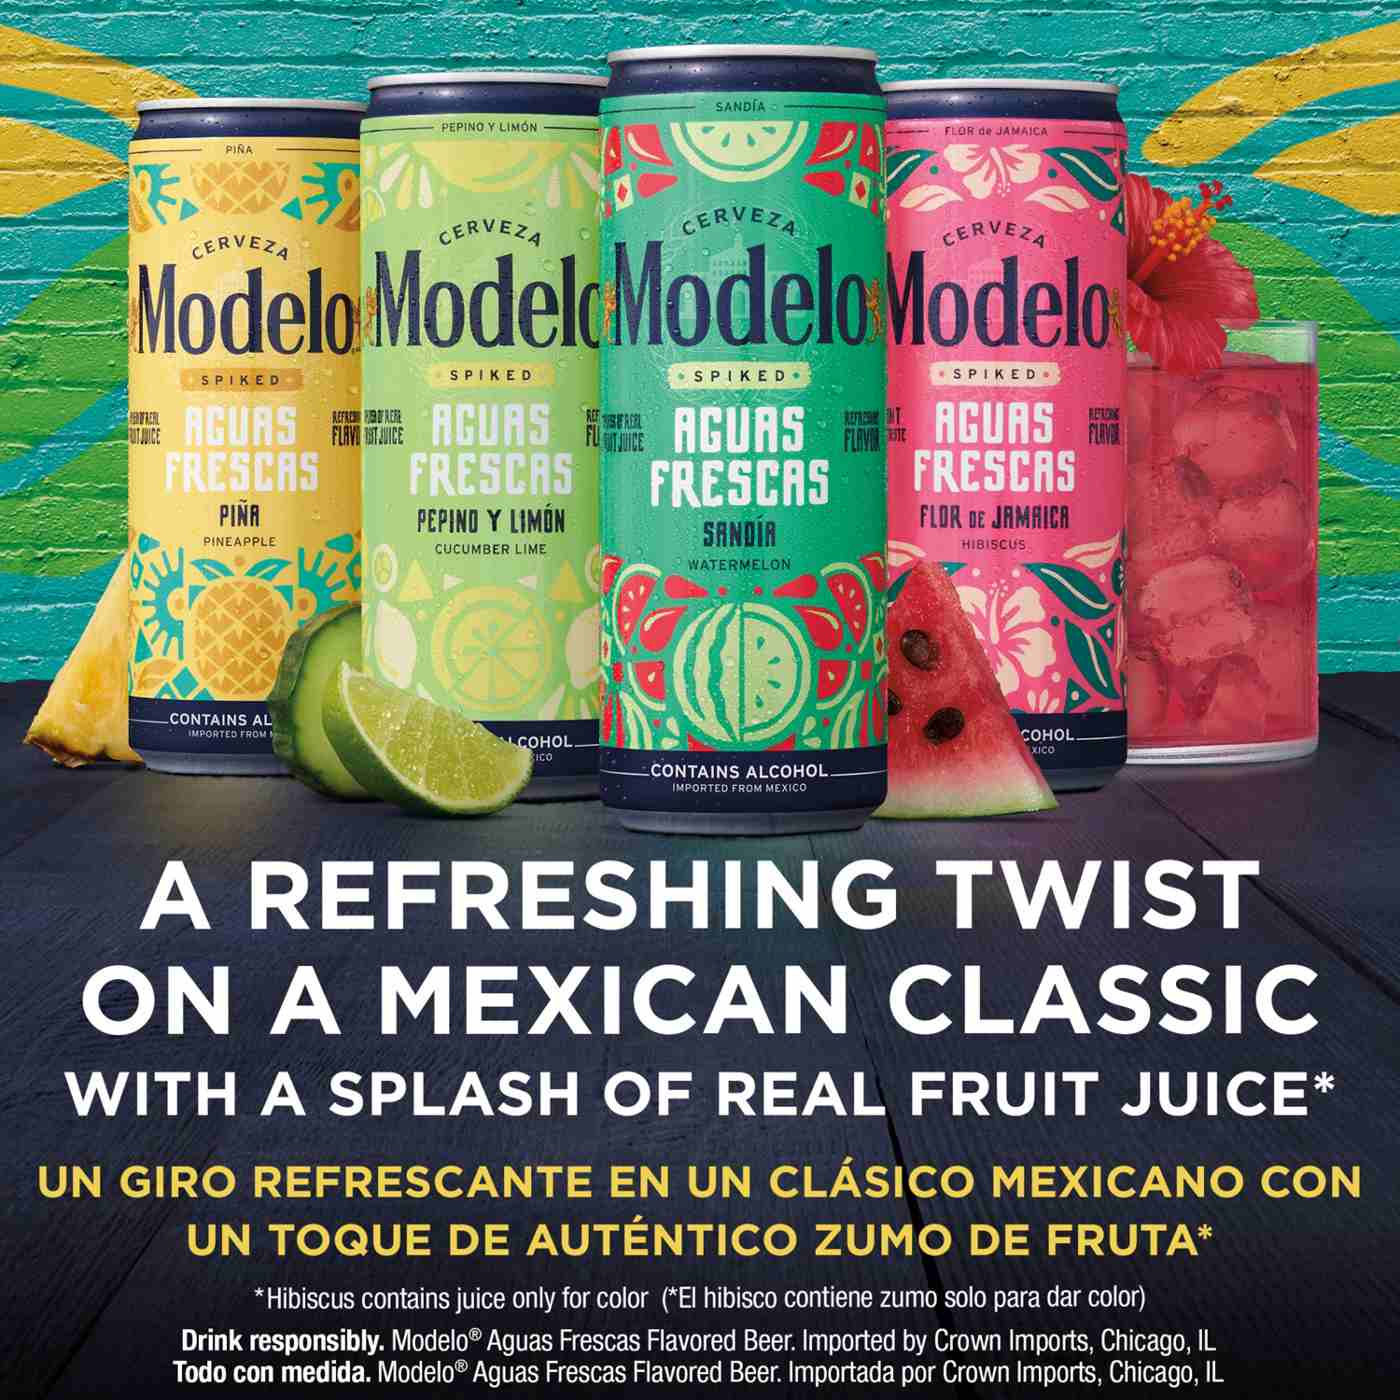 Modelo Spiked Aguas Frescas Spiked Frescas Variety Pack 12 pk Cans; image 2 of 8